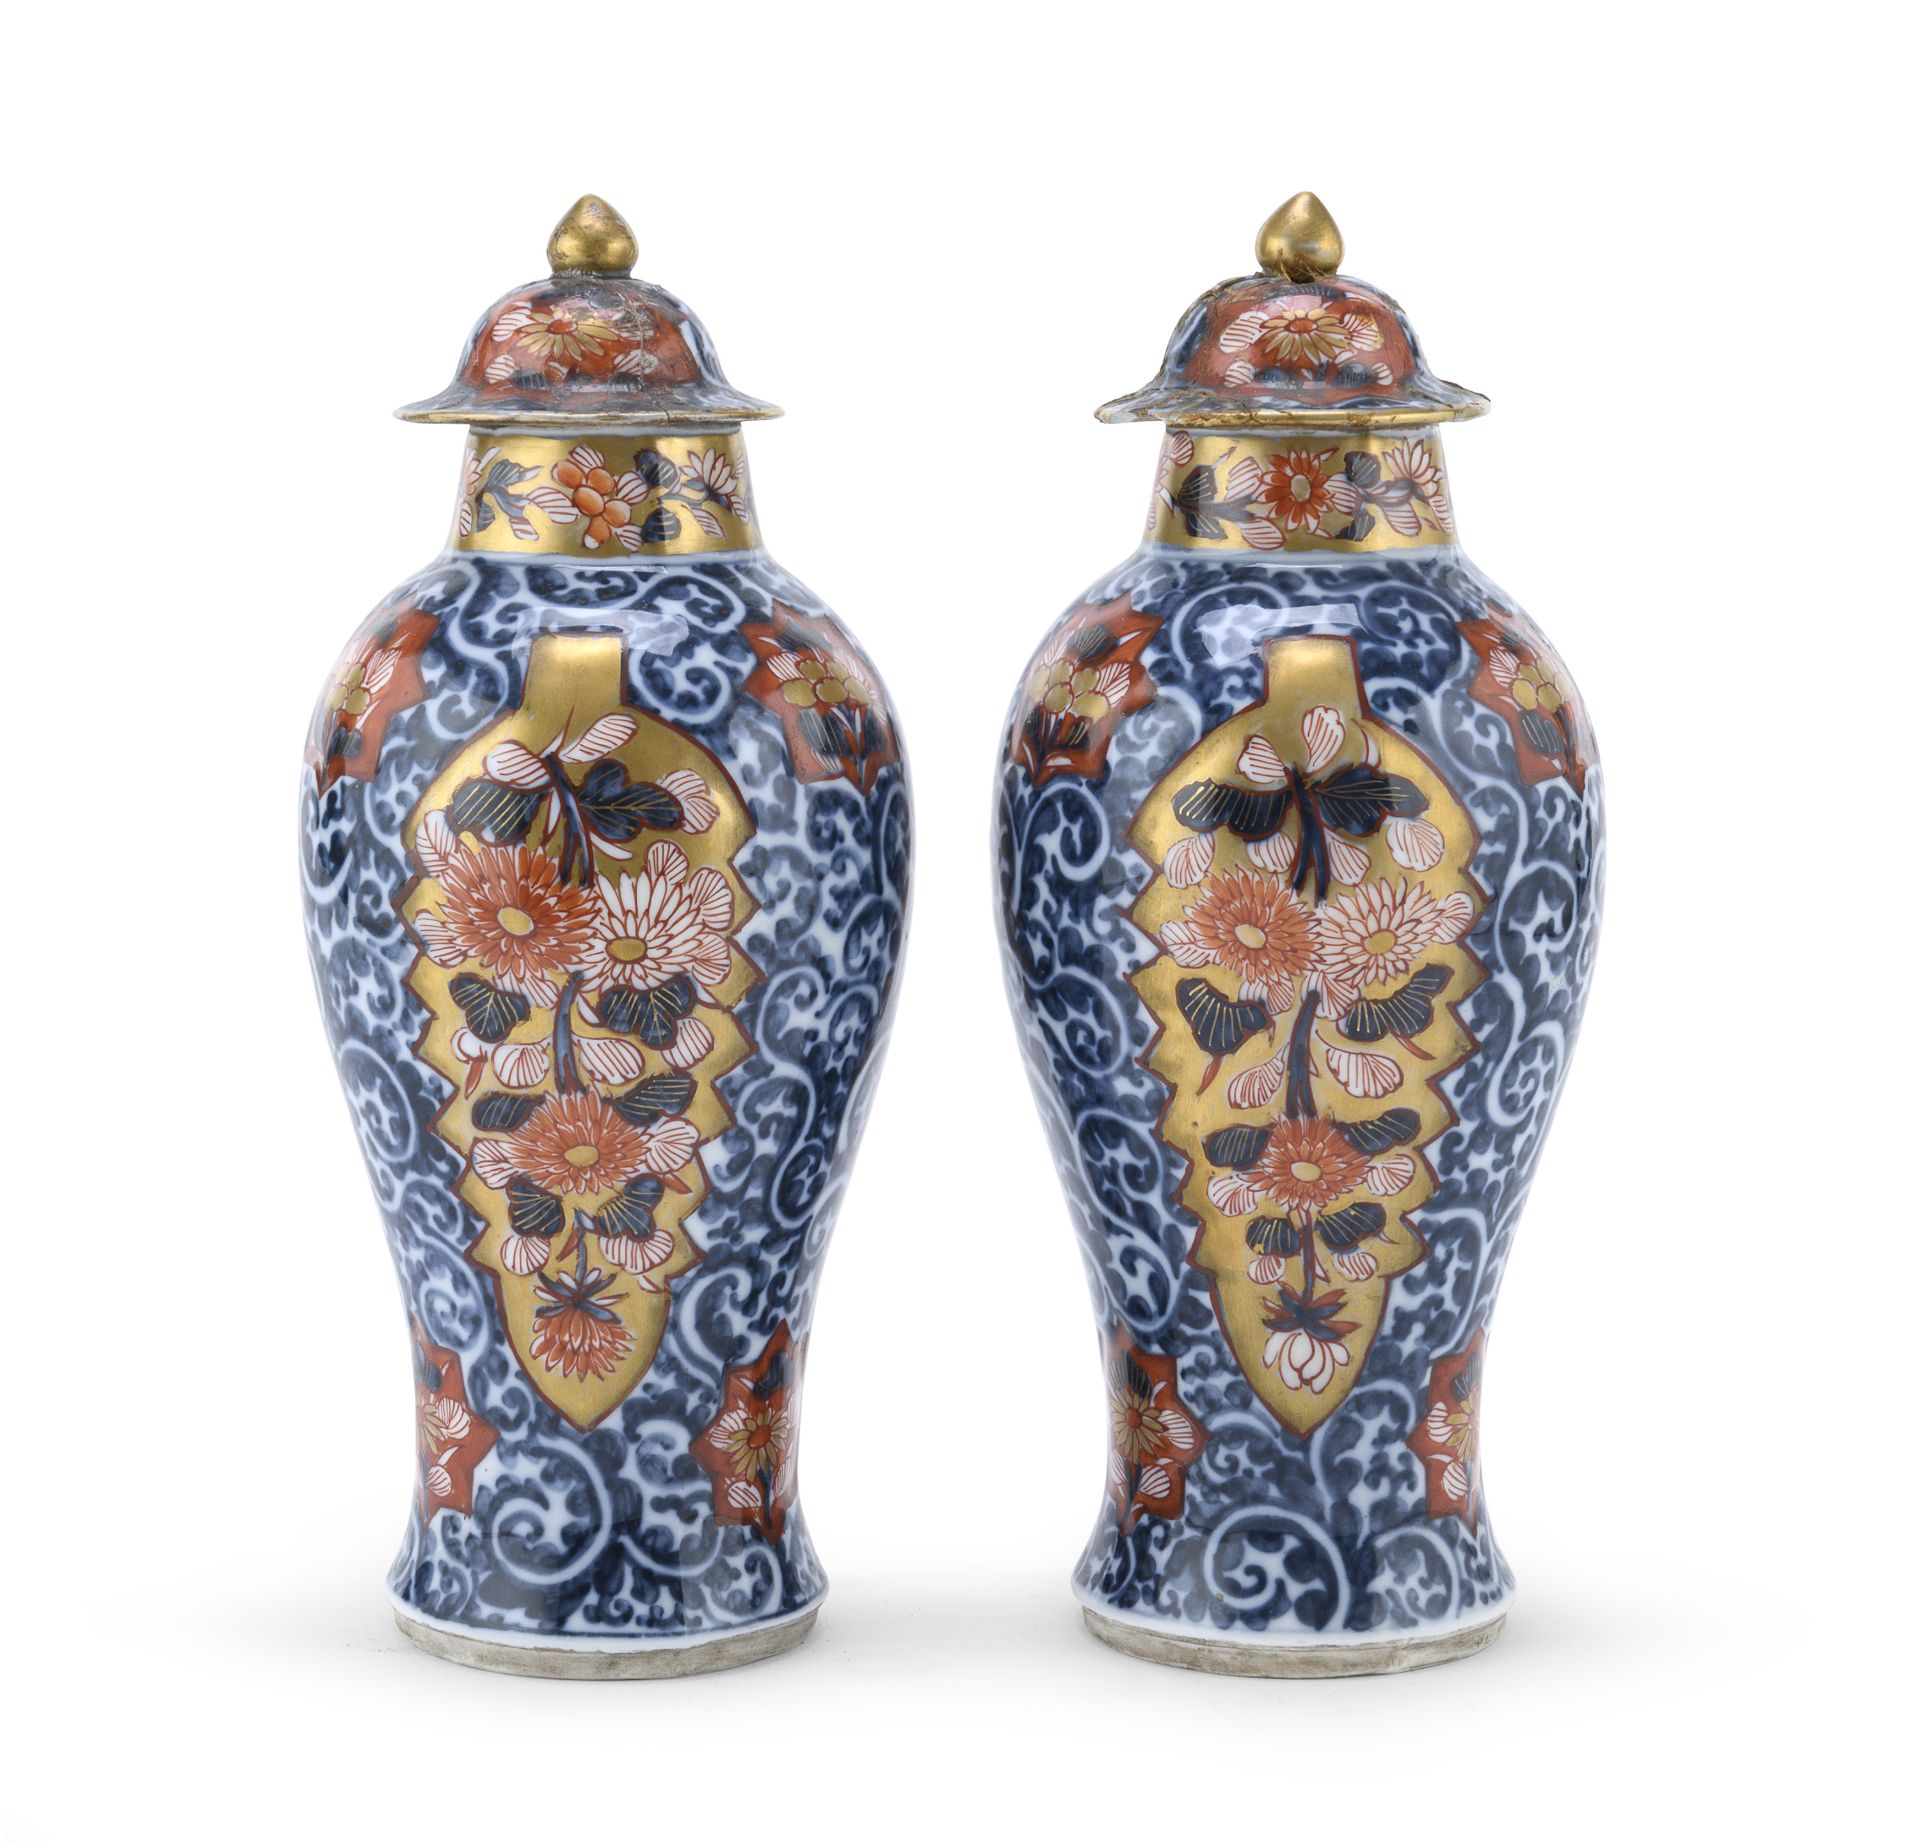 PAIR OF POLYCHROME AND GOLD ENAMELED PORCELAIN JARS WITH LID, JAPAN FIRST HALF 20TH CENTURY